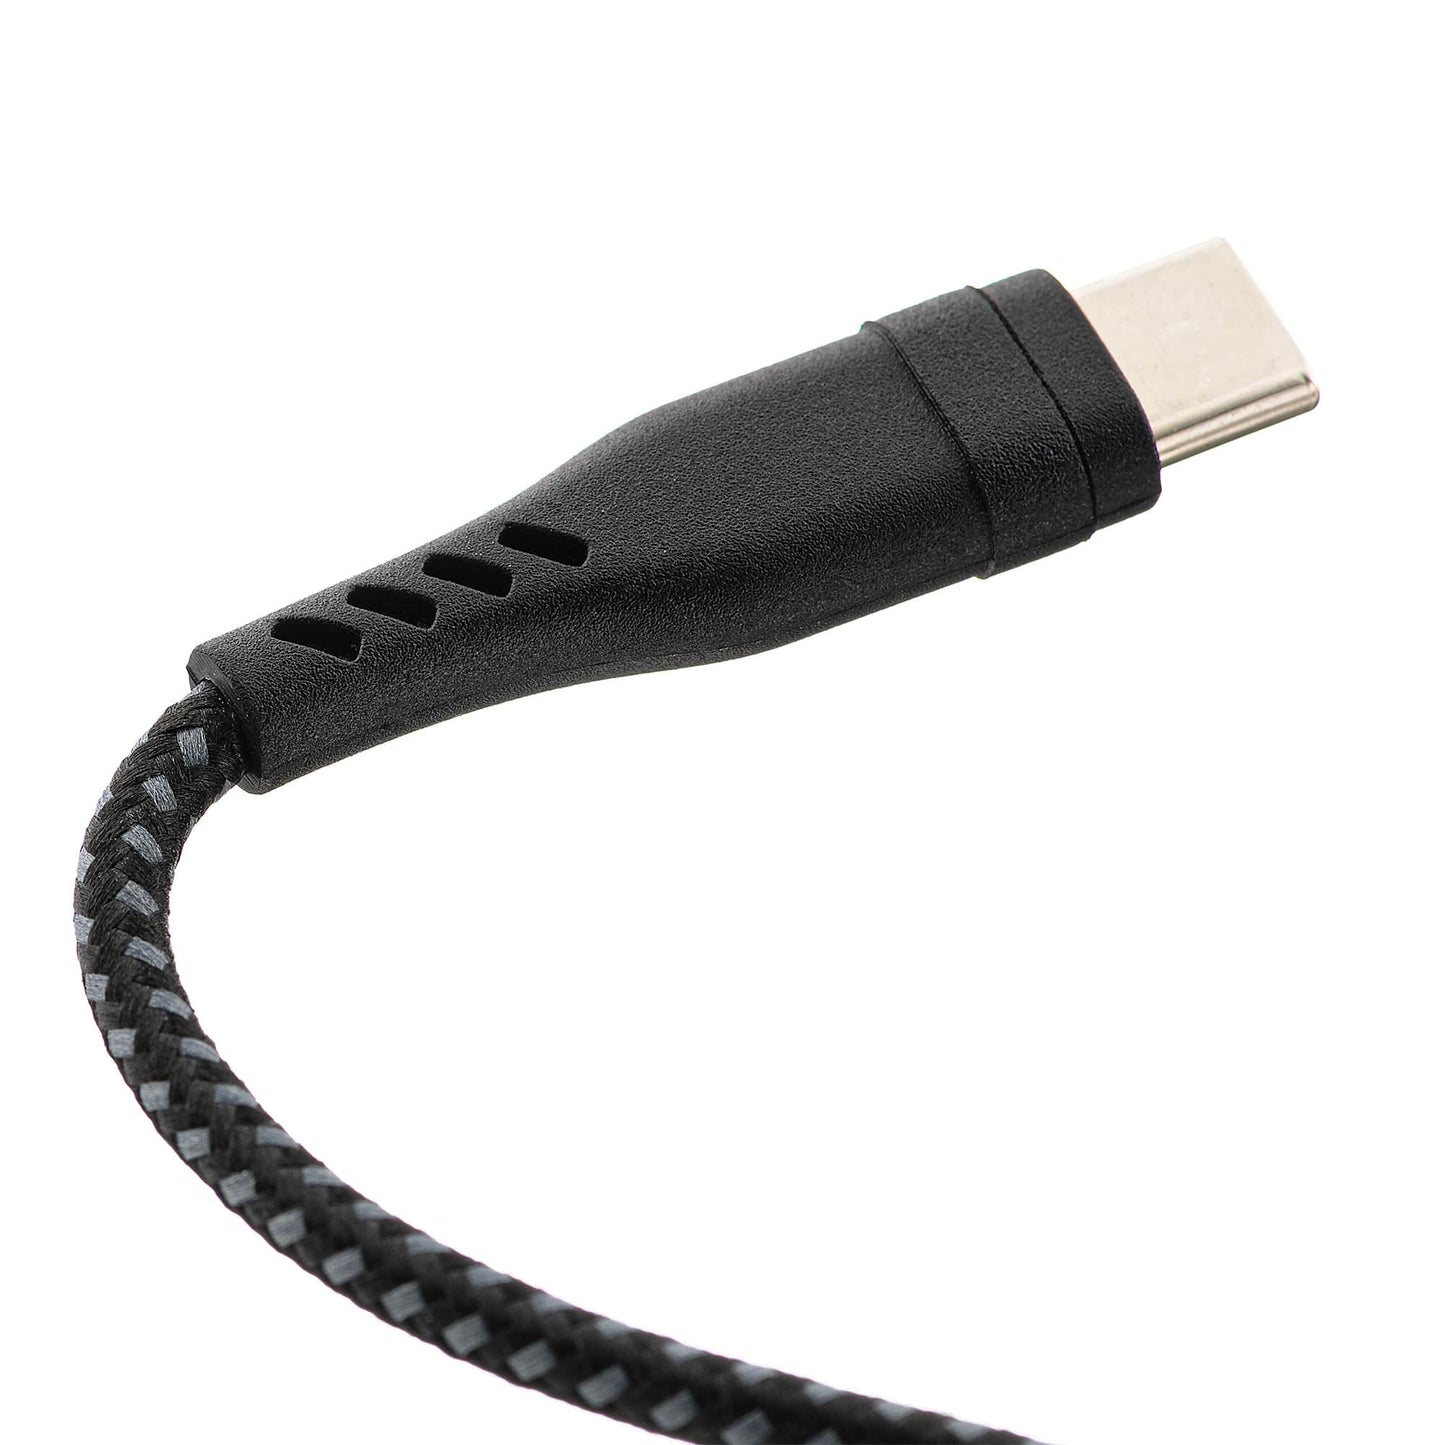 MOJOGEAR Apple Lightning to USB-C cable extra strong